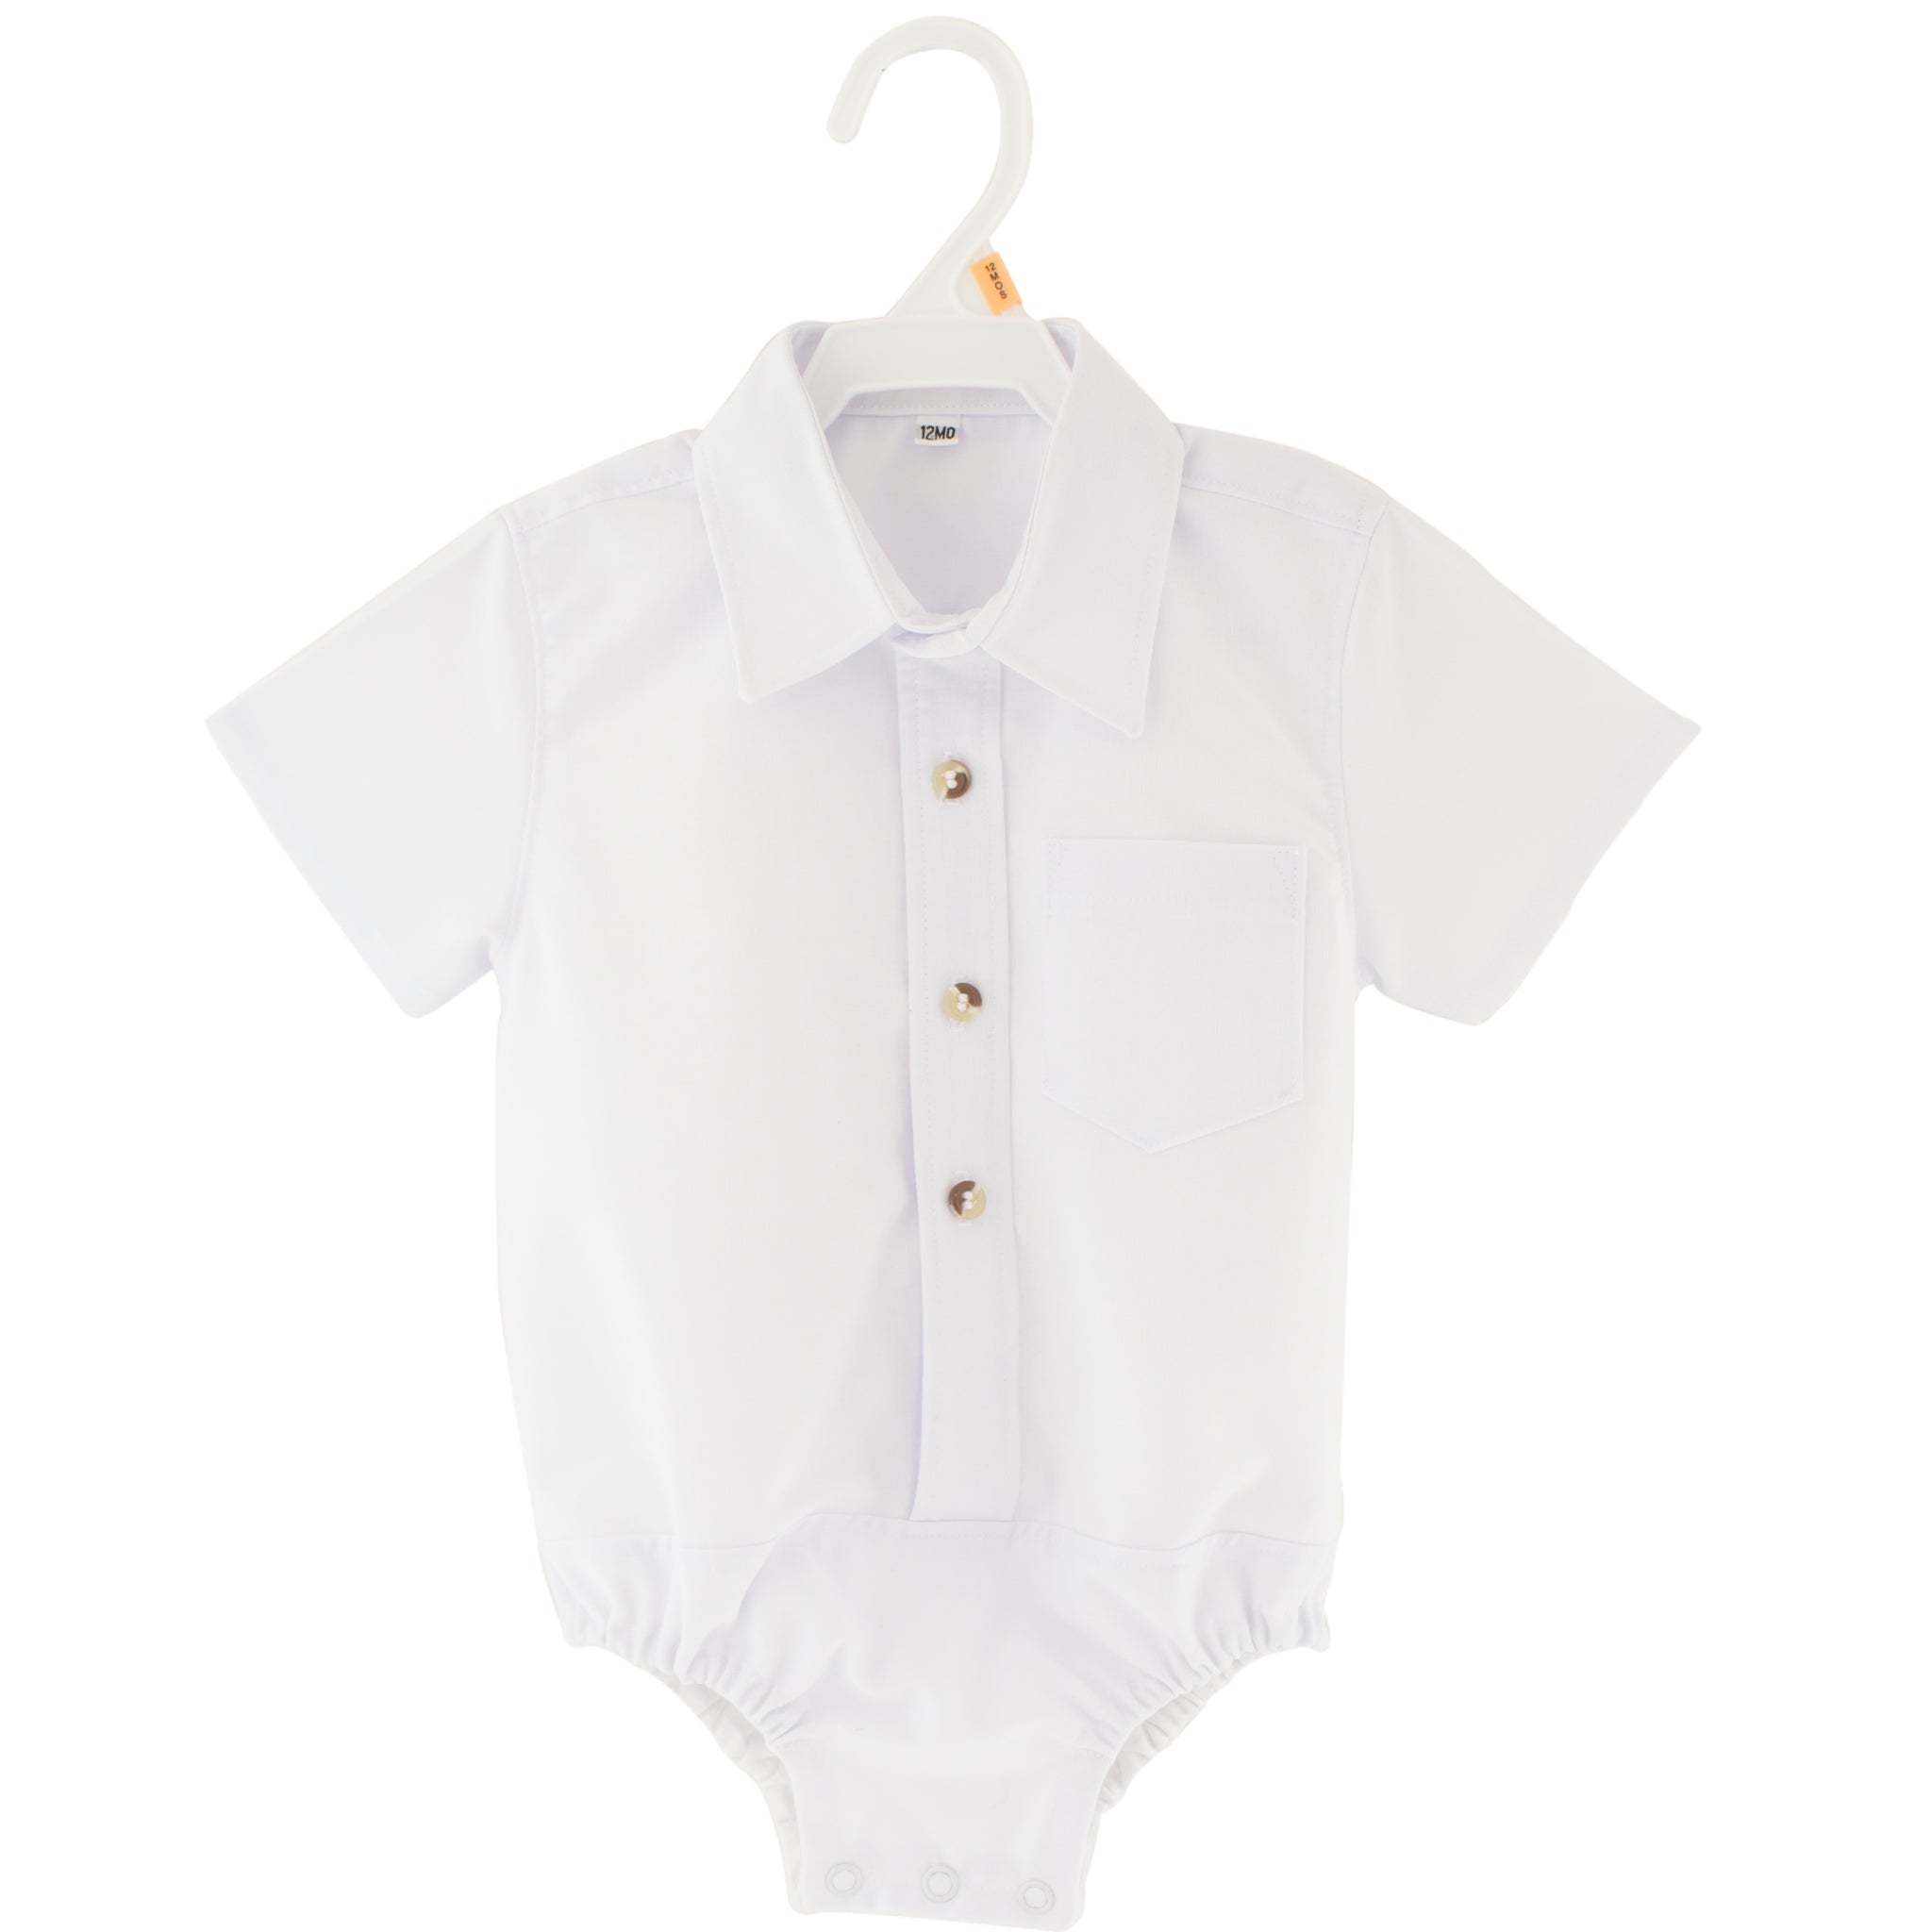 Baby Boys White Collared Bodysuit with Short Sleeves – Good's Store Online